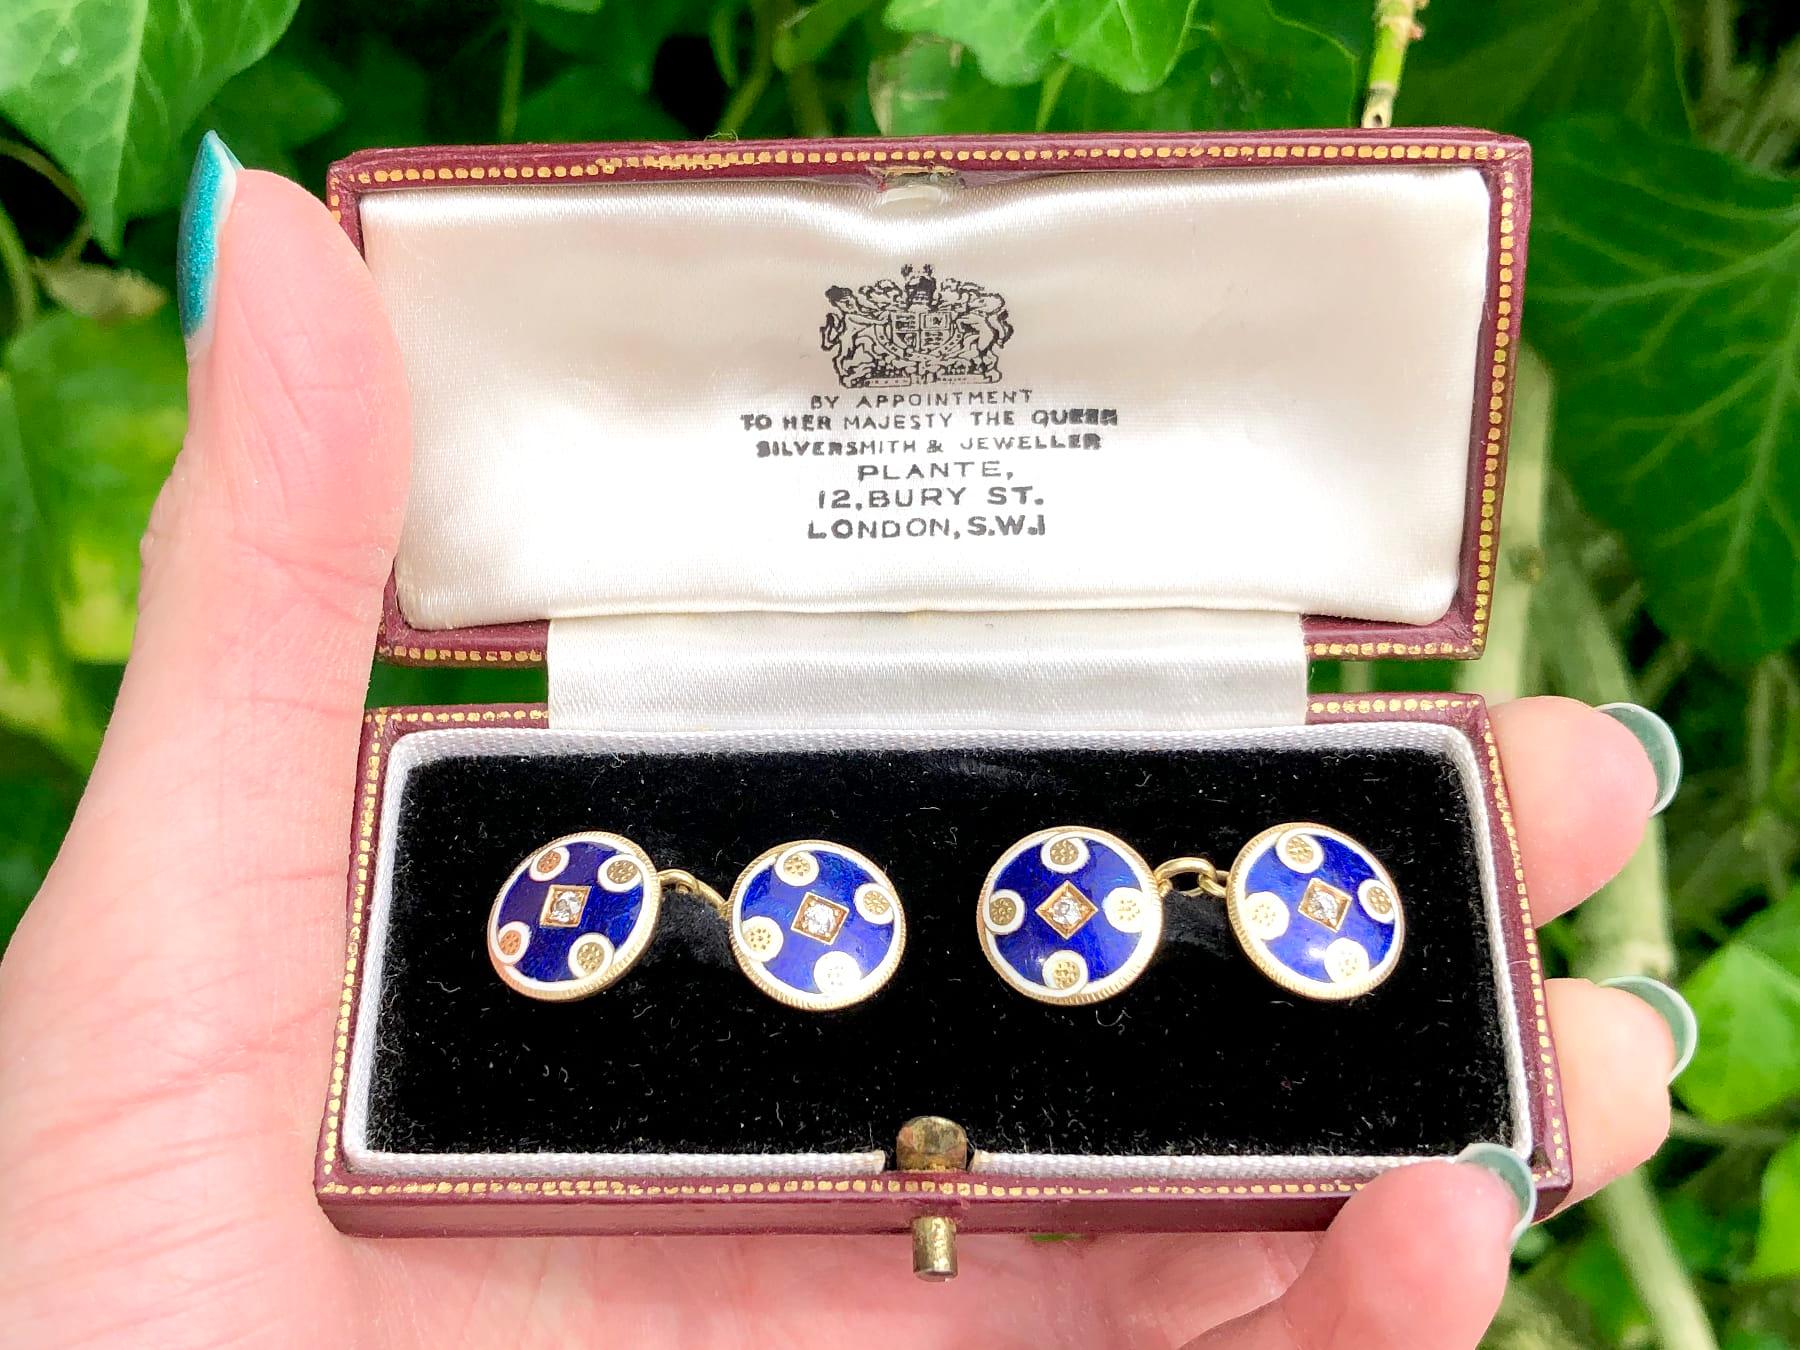 An impressive pair of antique Victorian 0.24 carat diamond and enamel, 18 carat yellow gold cufflinks; part of our diverse antique jewellery and estate jewelry collections

These fine and impressive antique cufflinks have been crafted in 18ct yellow